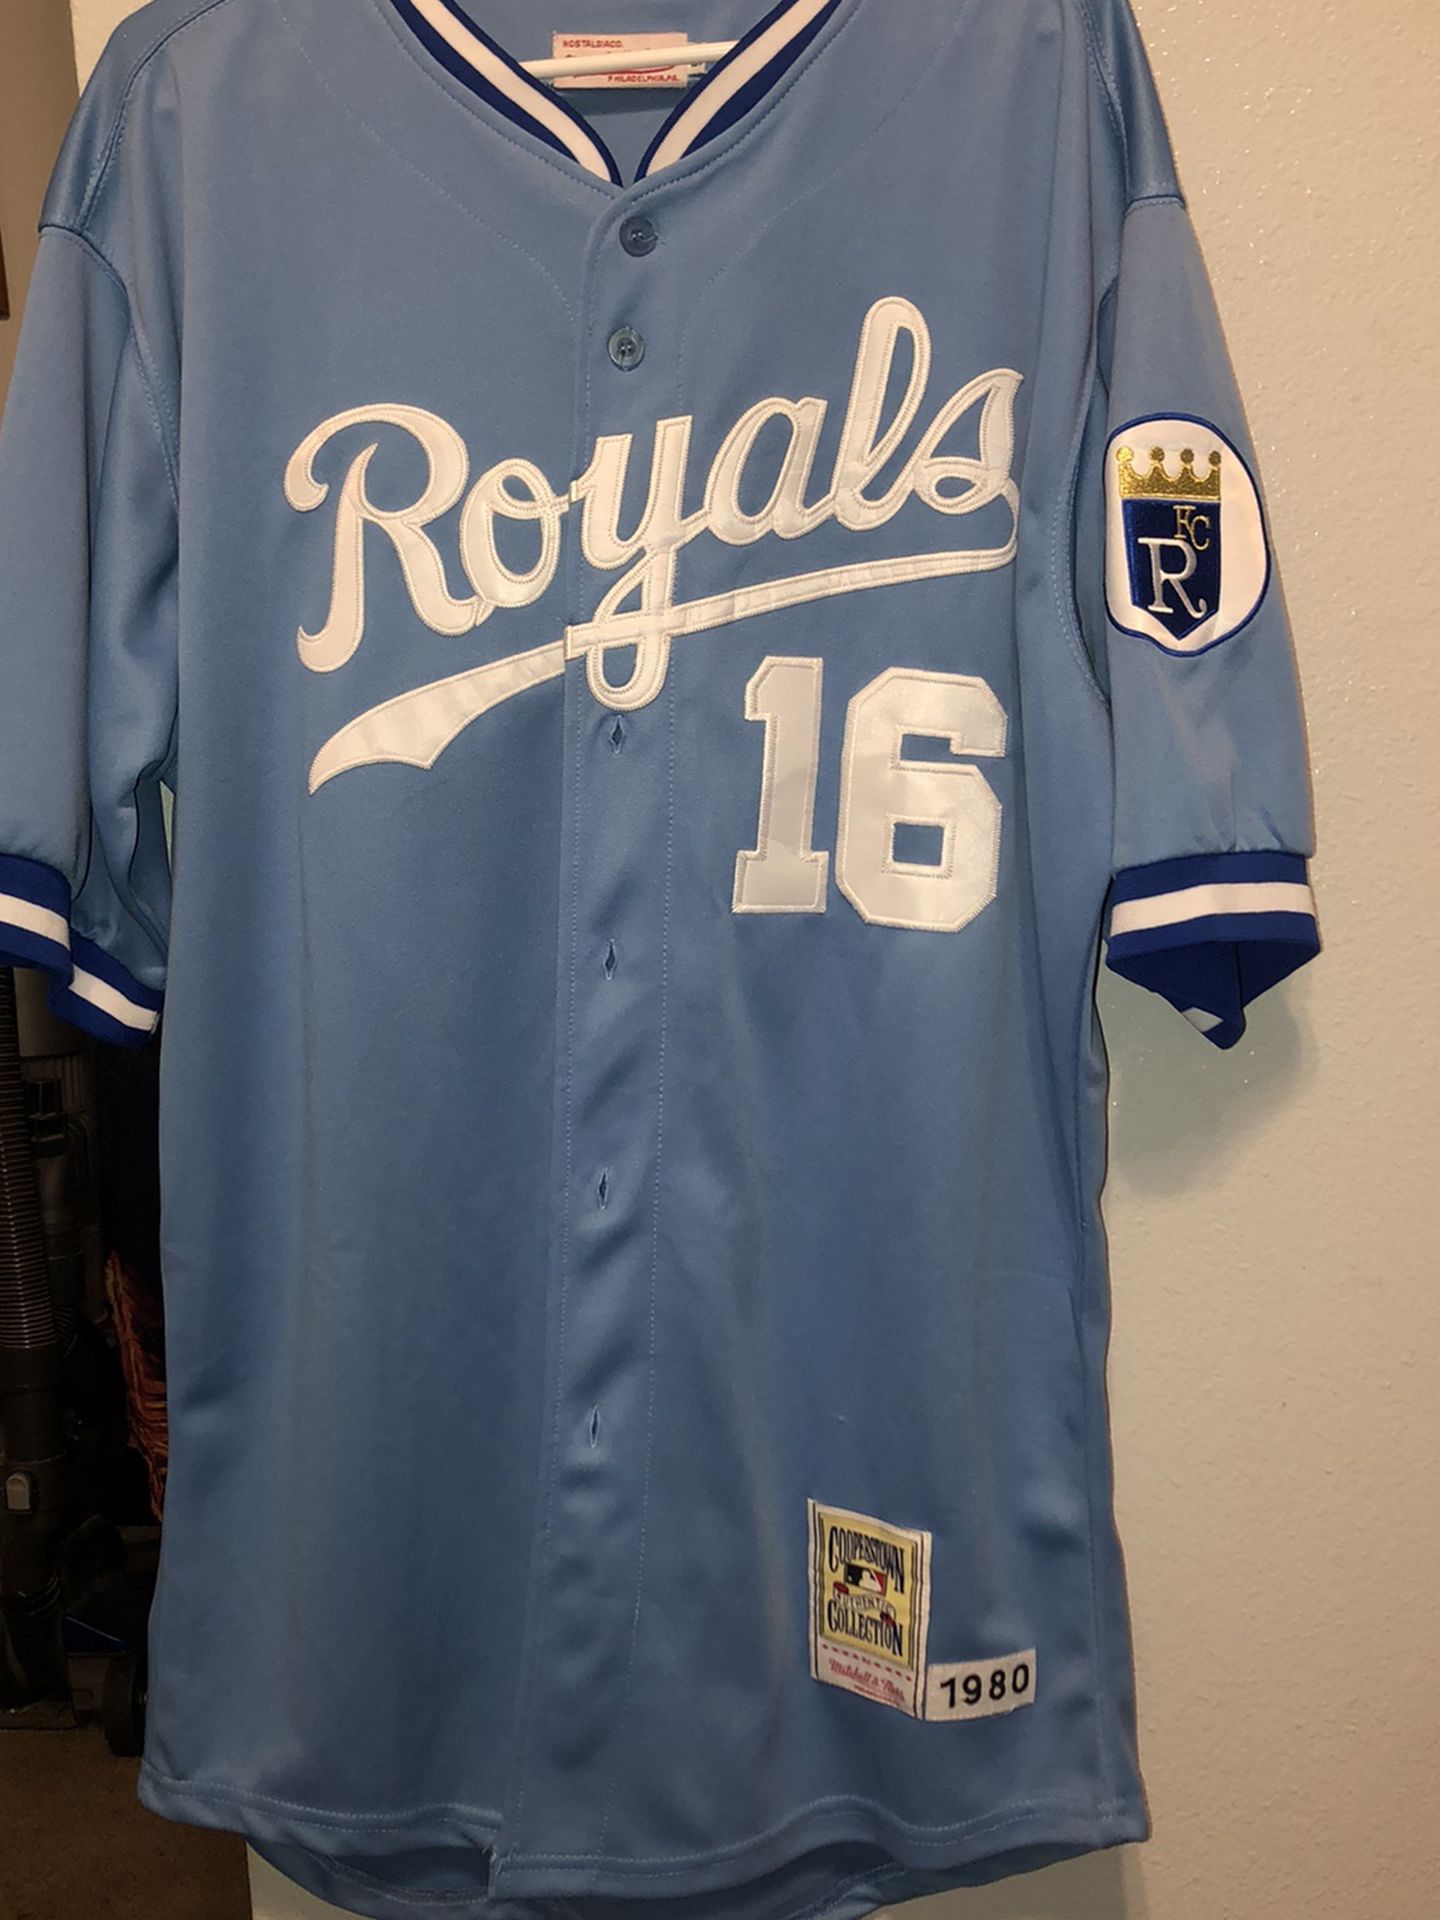 Bo Jackson Royals Jersey for Sale in Beaverton, OR - OfferUp